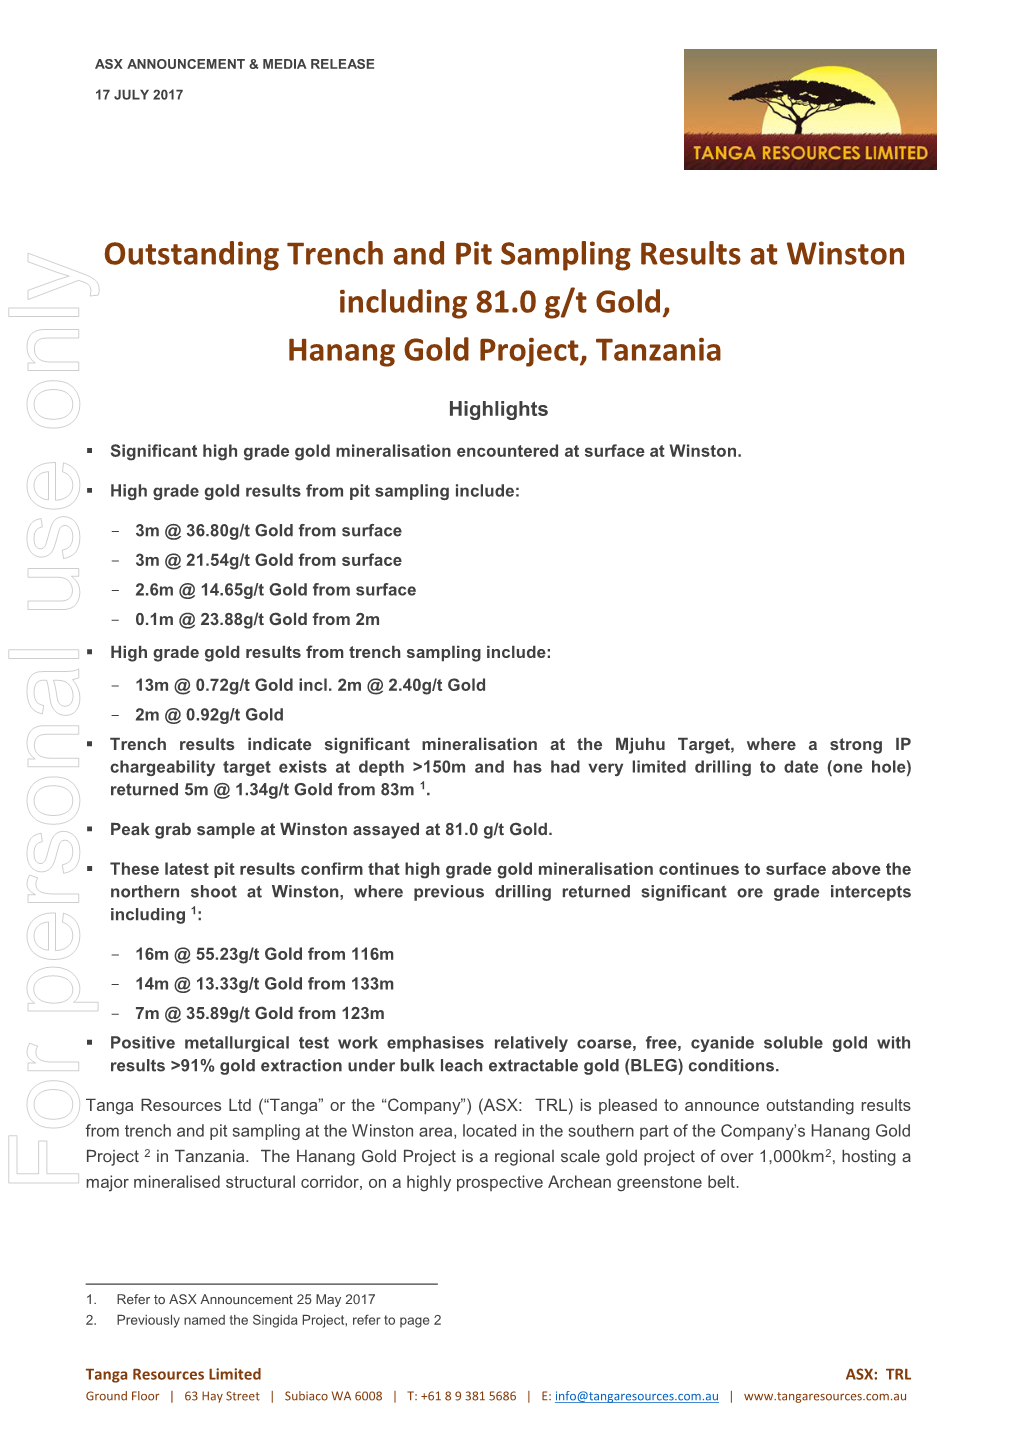 Outstanding Trench and Pit Sampling Results at Winston Including 81.0 G/T Gold, Hanang Gold Project, Tanzania